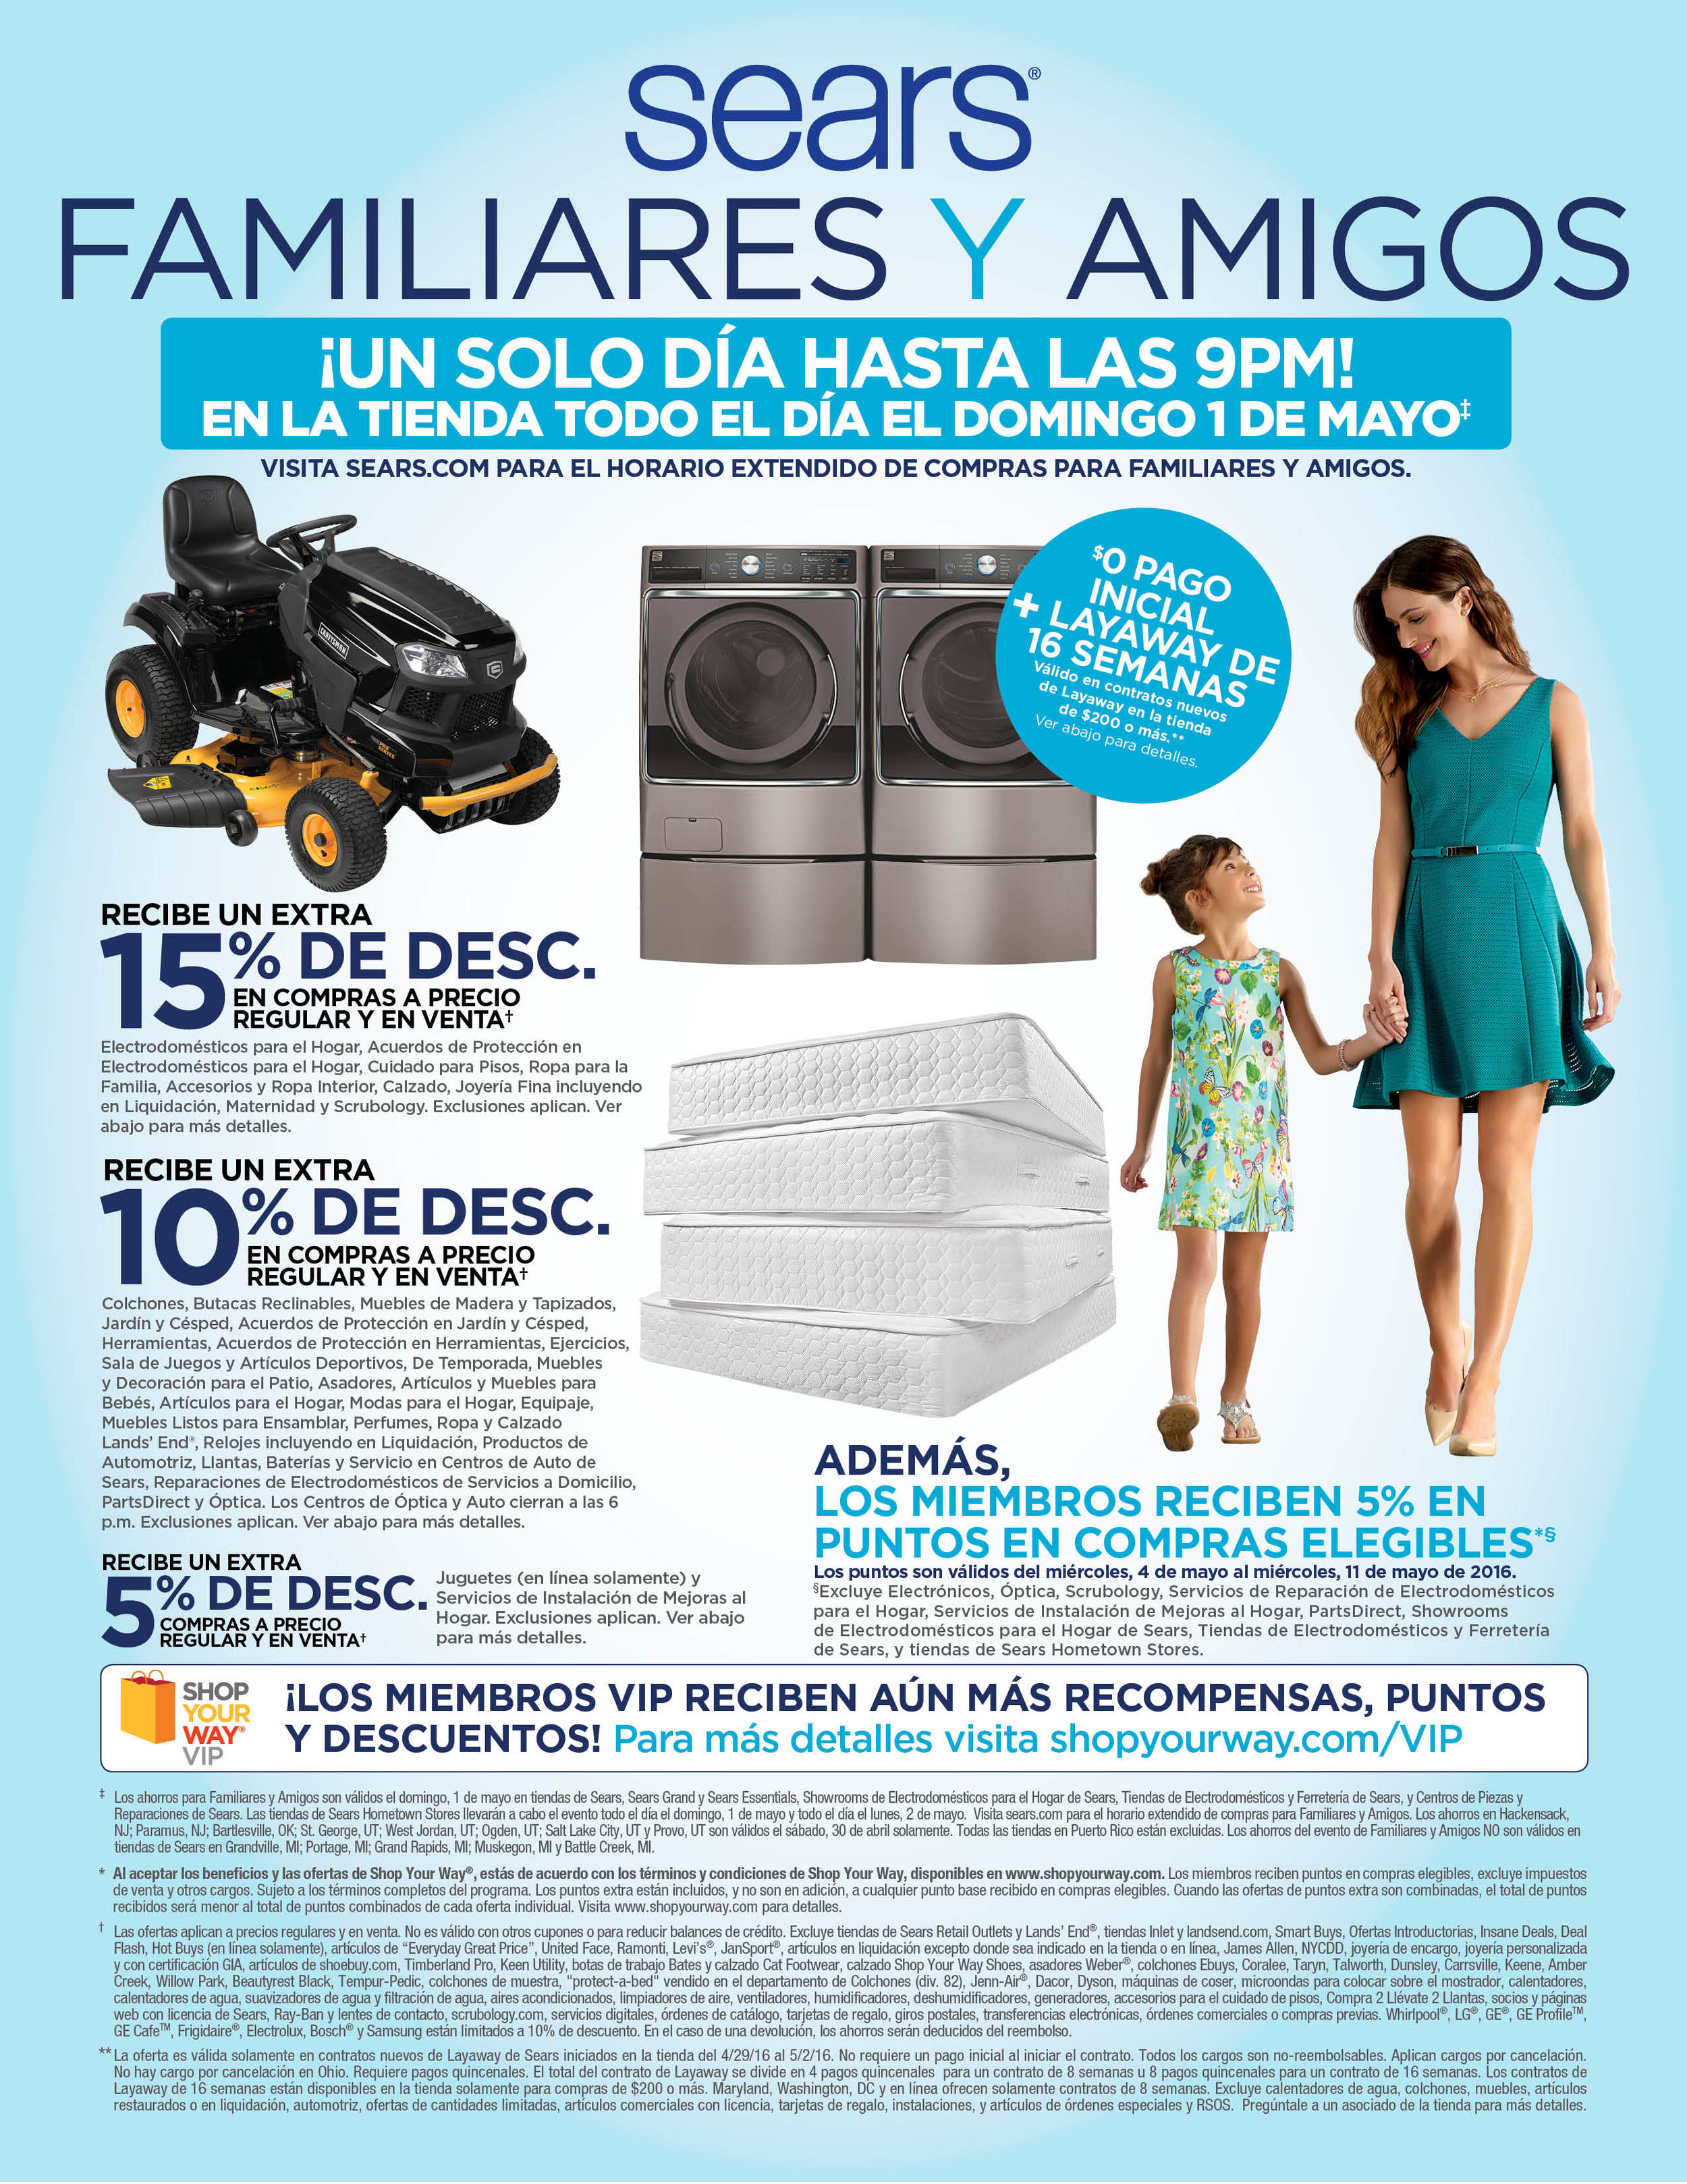 Sears Boyle Heights Family & Friends Sale — Boyle Heights Chamber of  Commerce